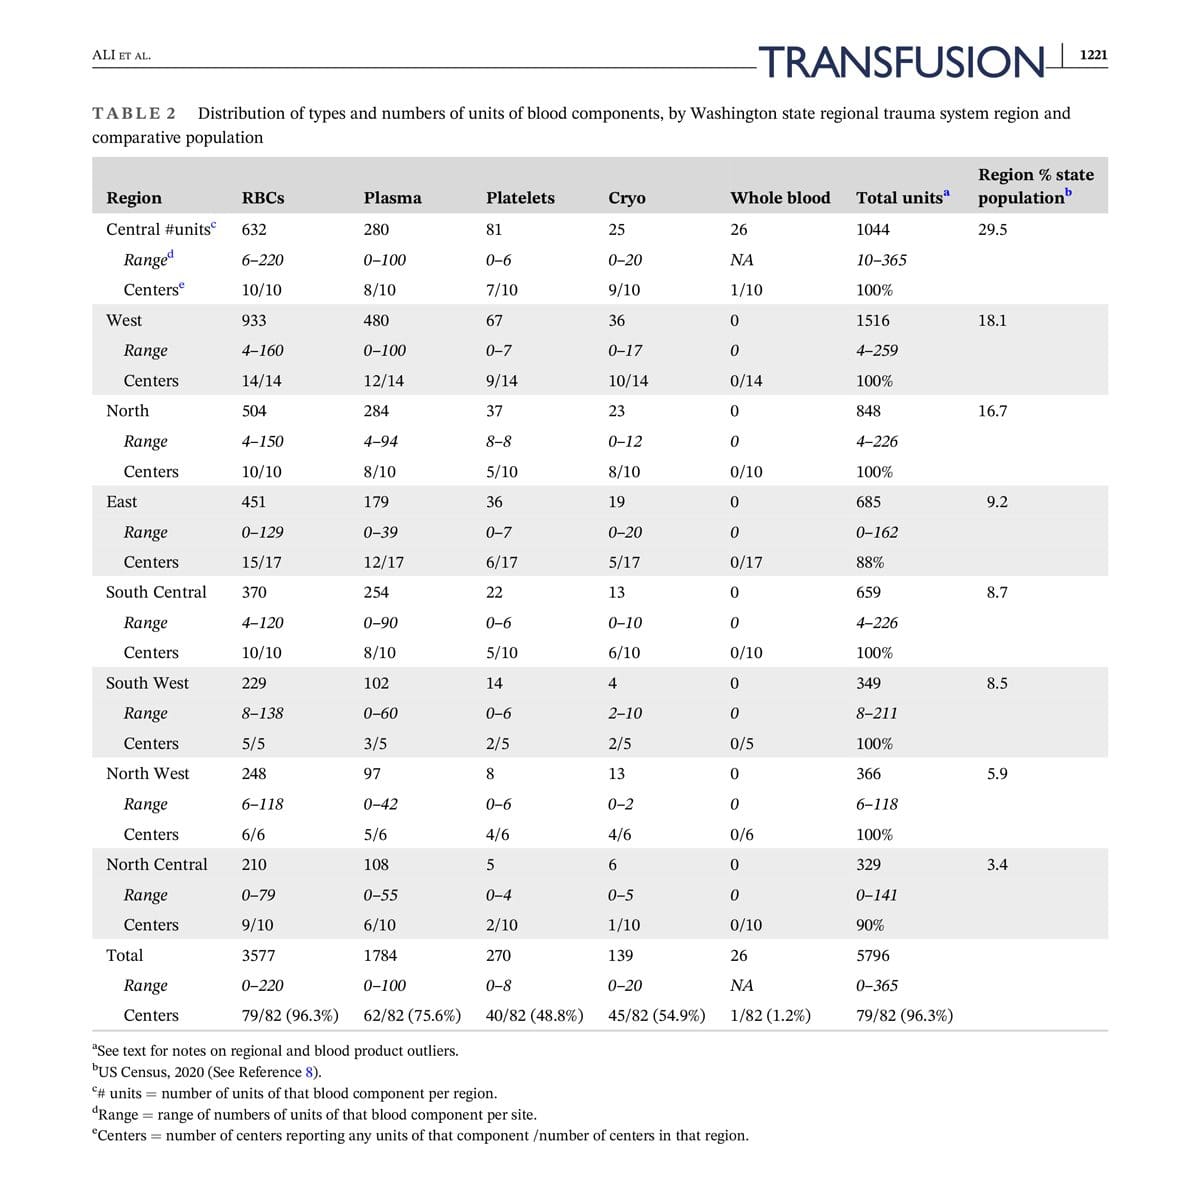 Table (2) features distribution of types and numbers of units of blood components, by Washington state regional trauma system region and comparative population